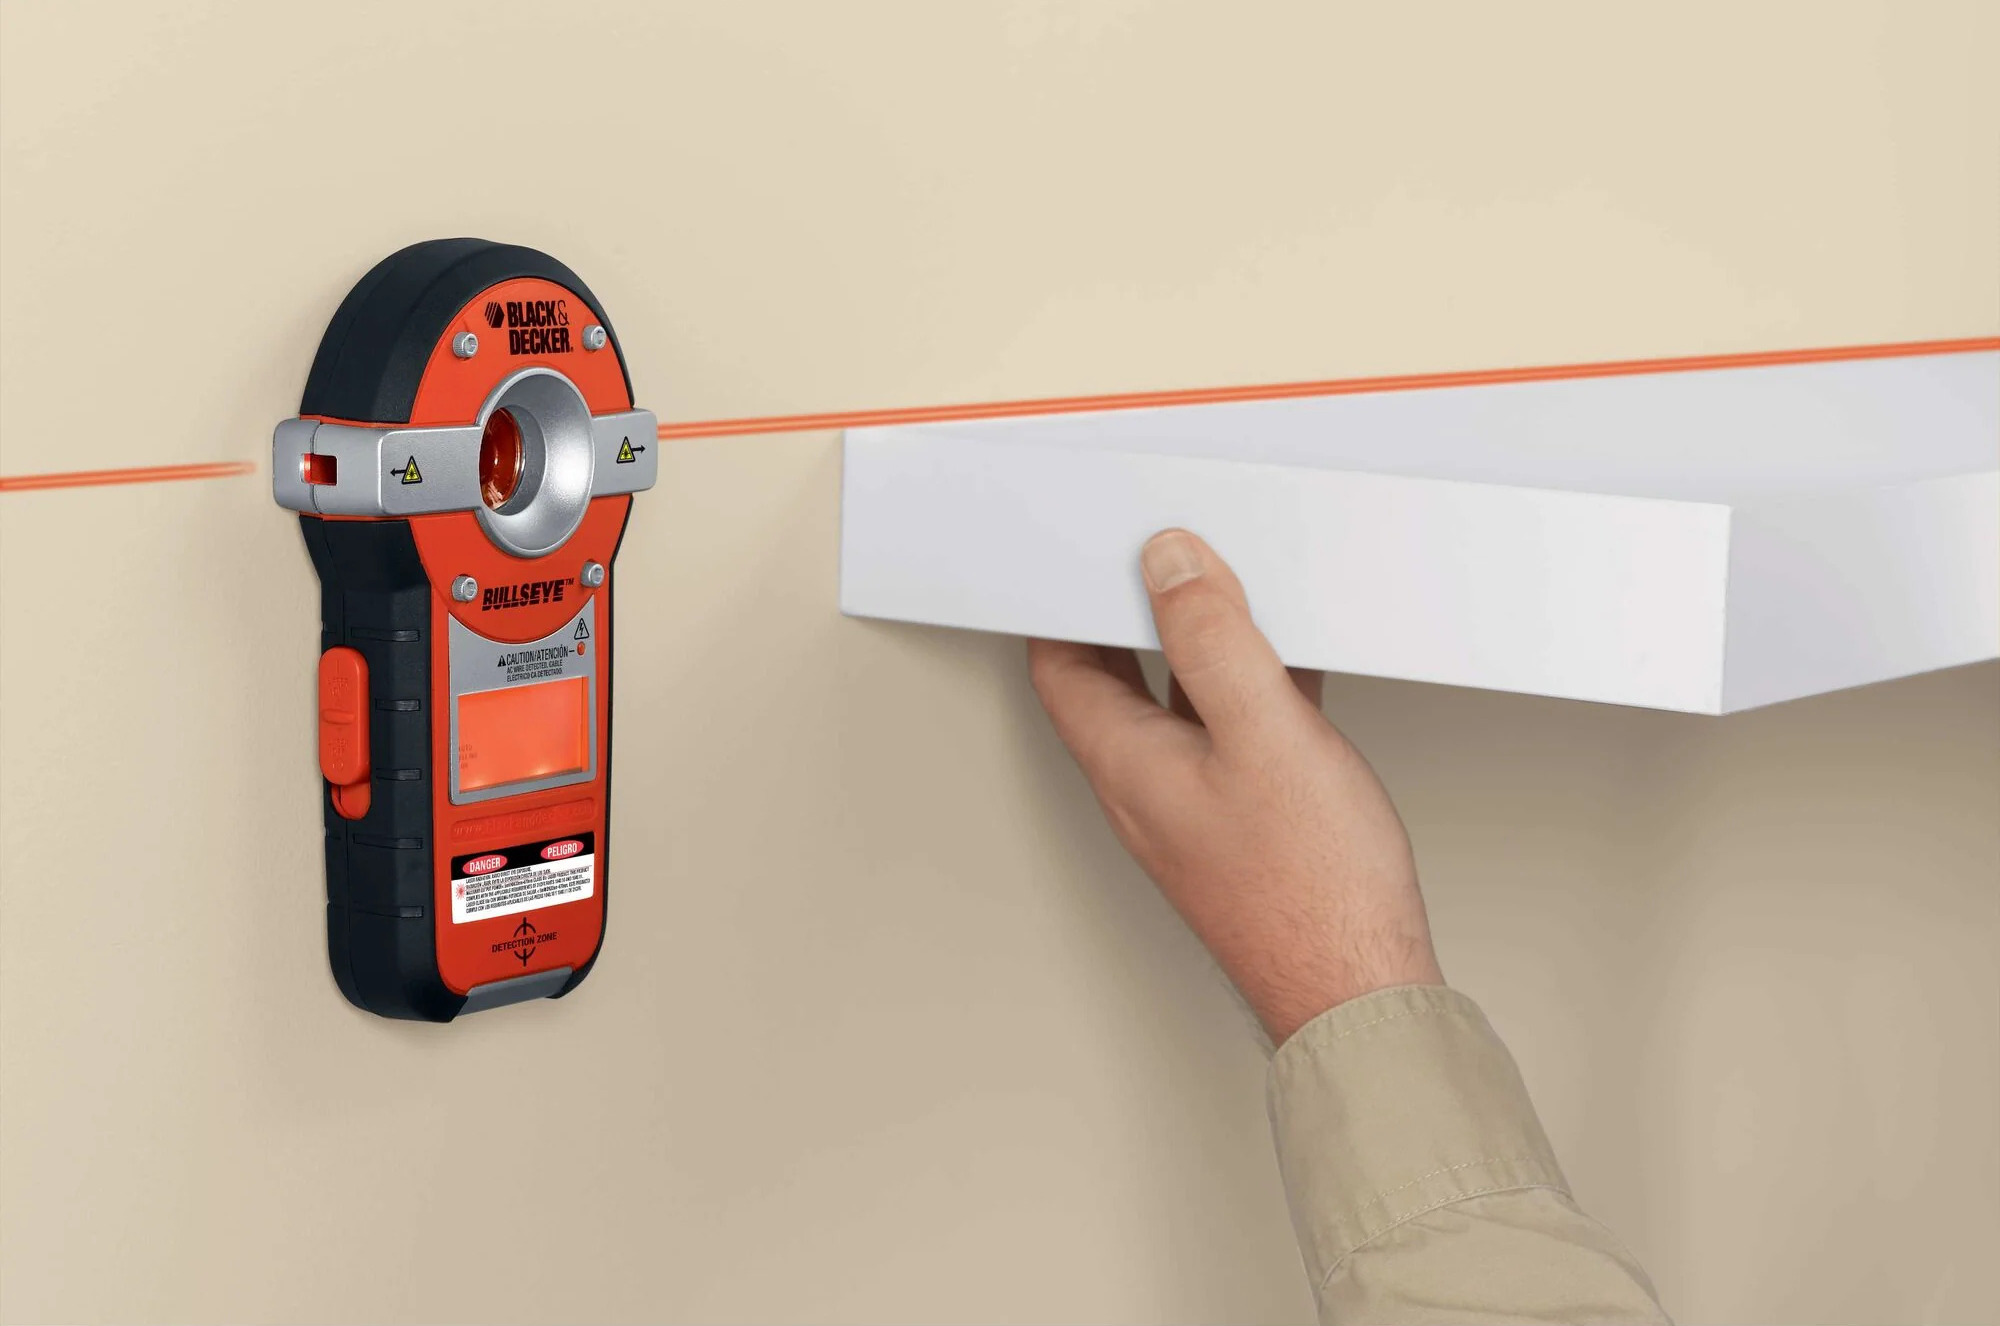 How To Use Black And Decker Laser Level